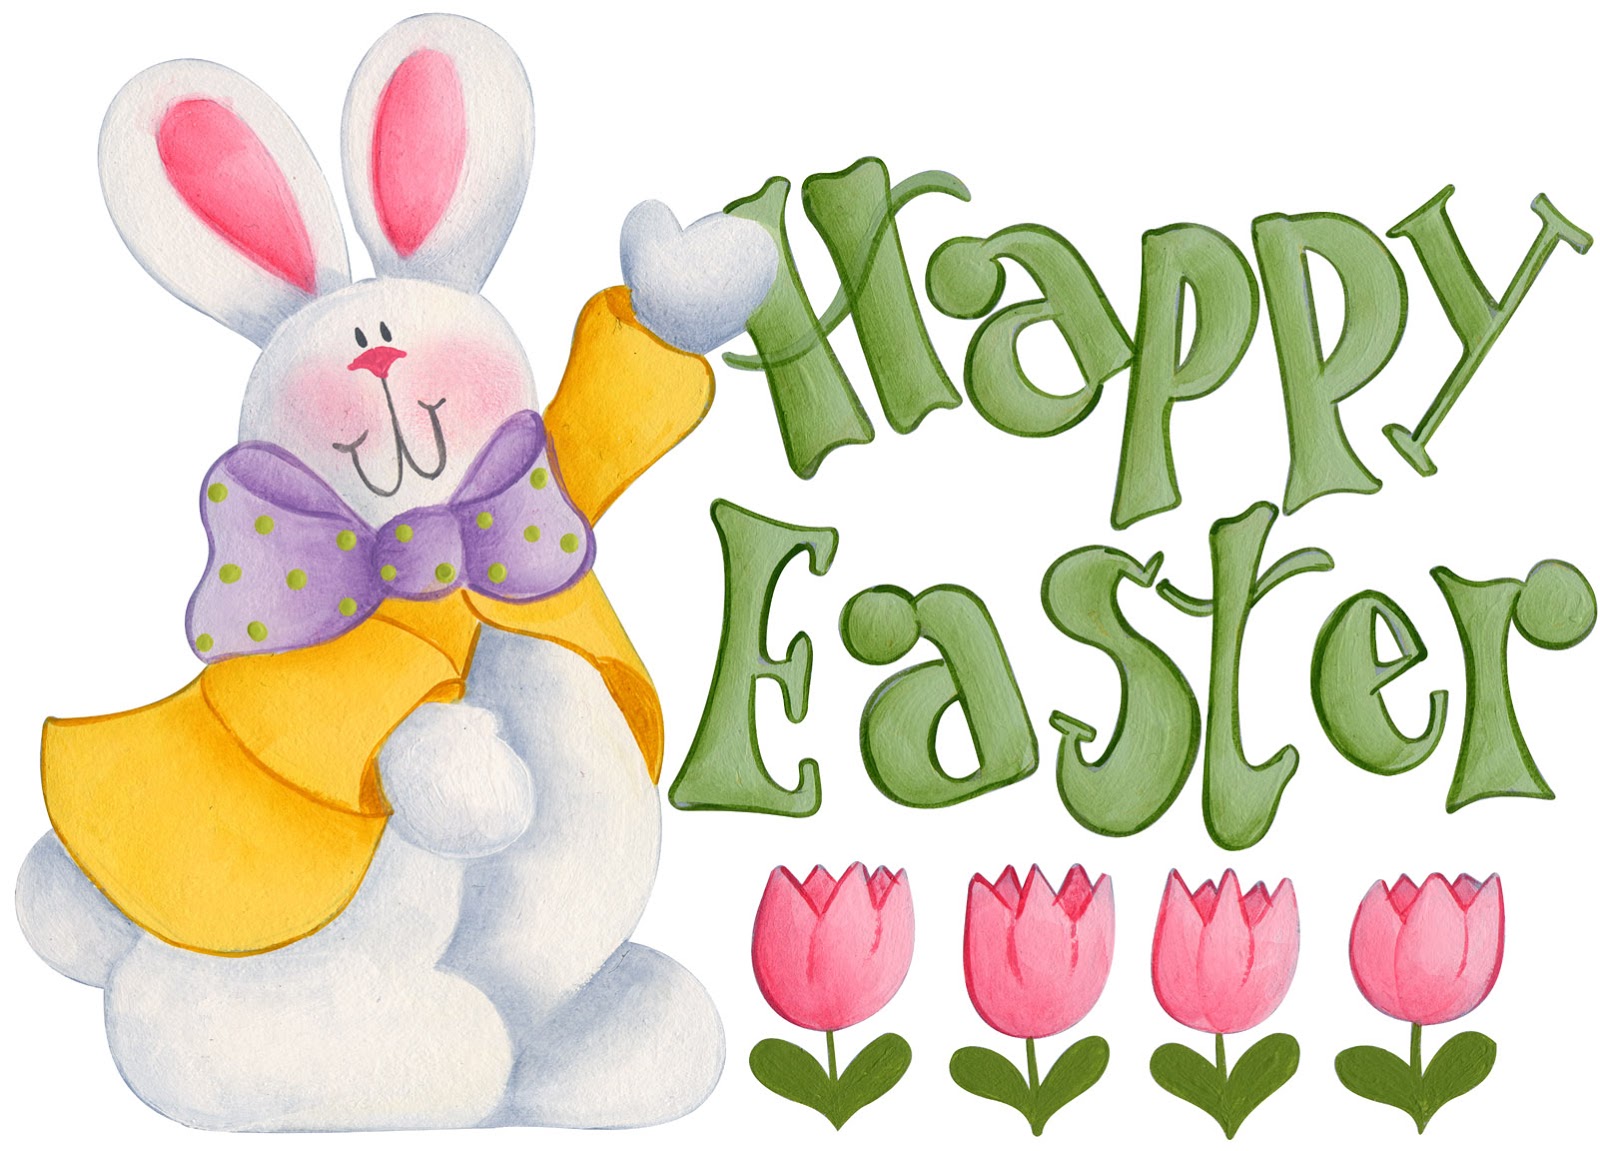 Happy easter images pictures with quotes wishes jpg 3